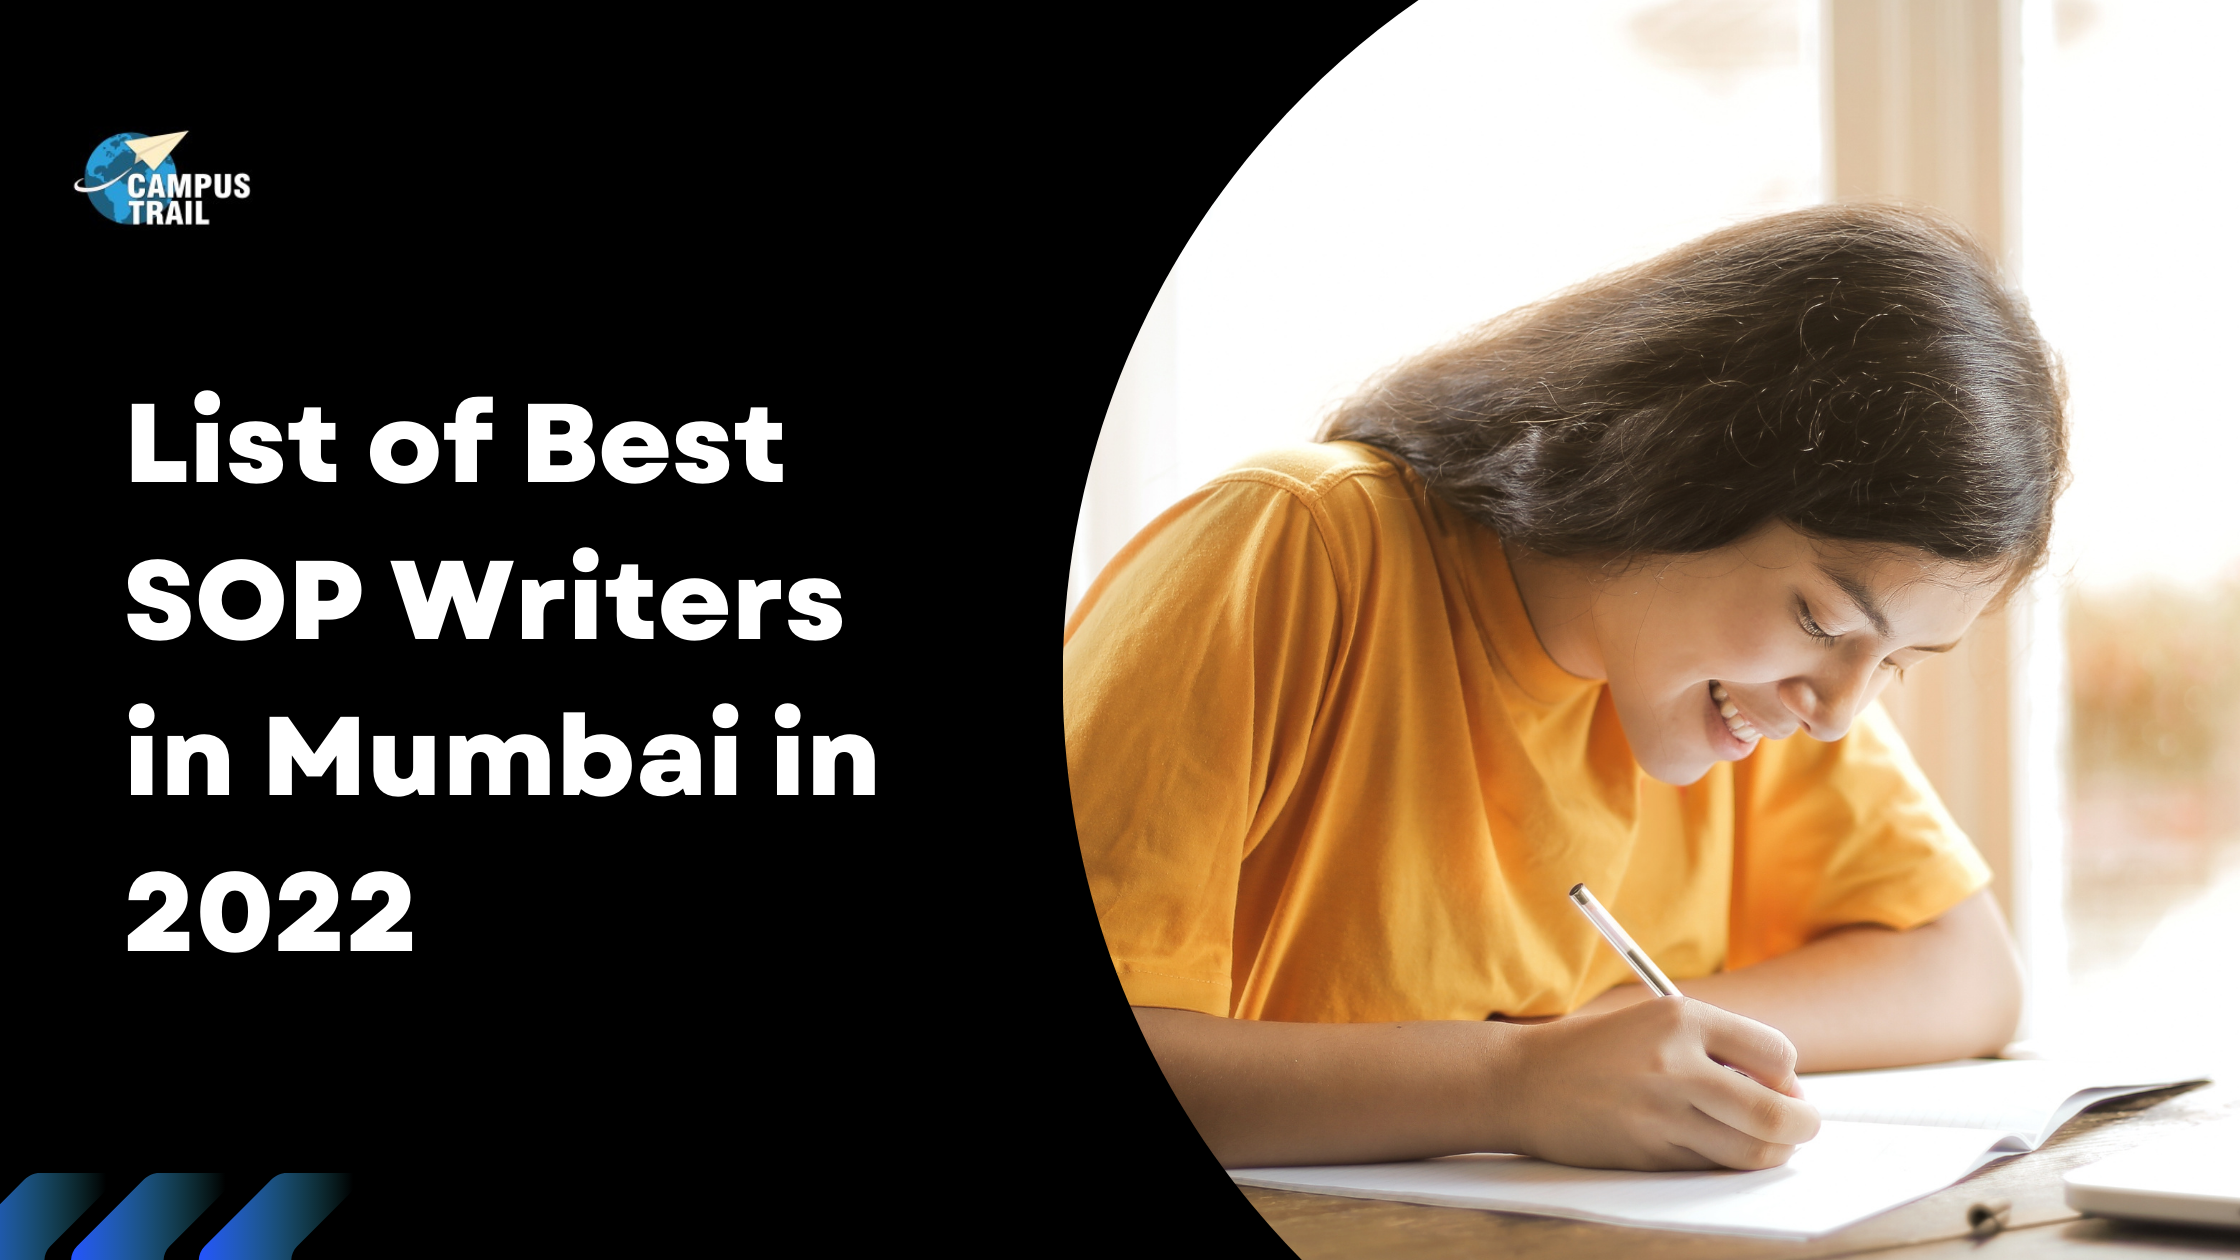 You are currently viewing List of Best SOP Writers in Mumbai in 2022